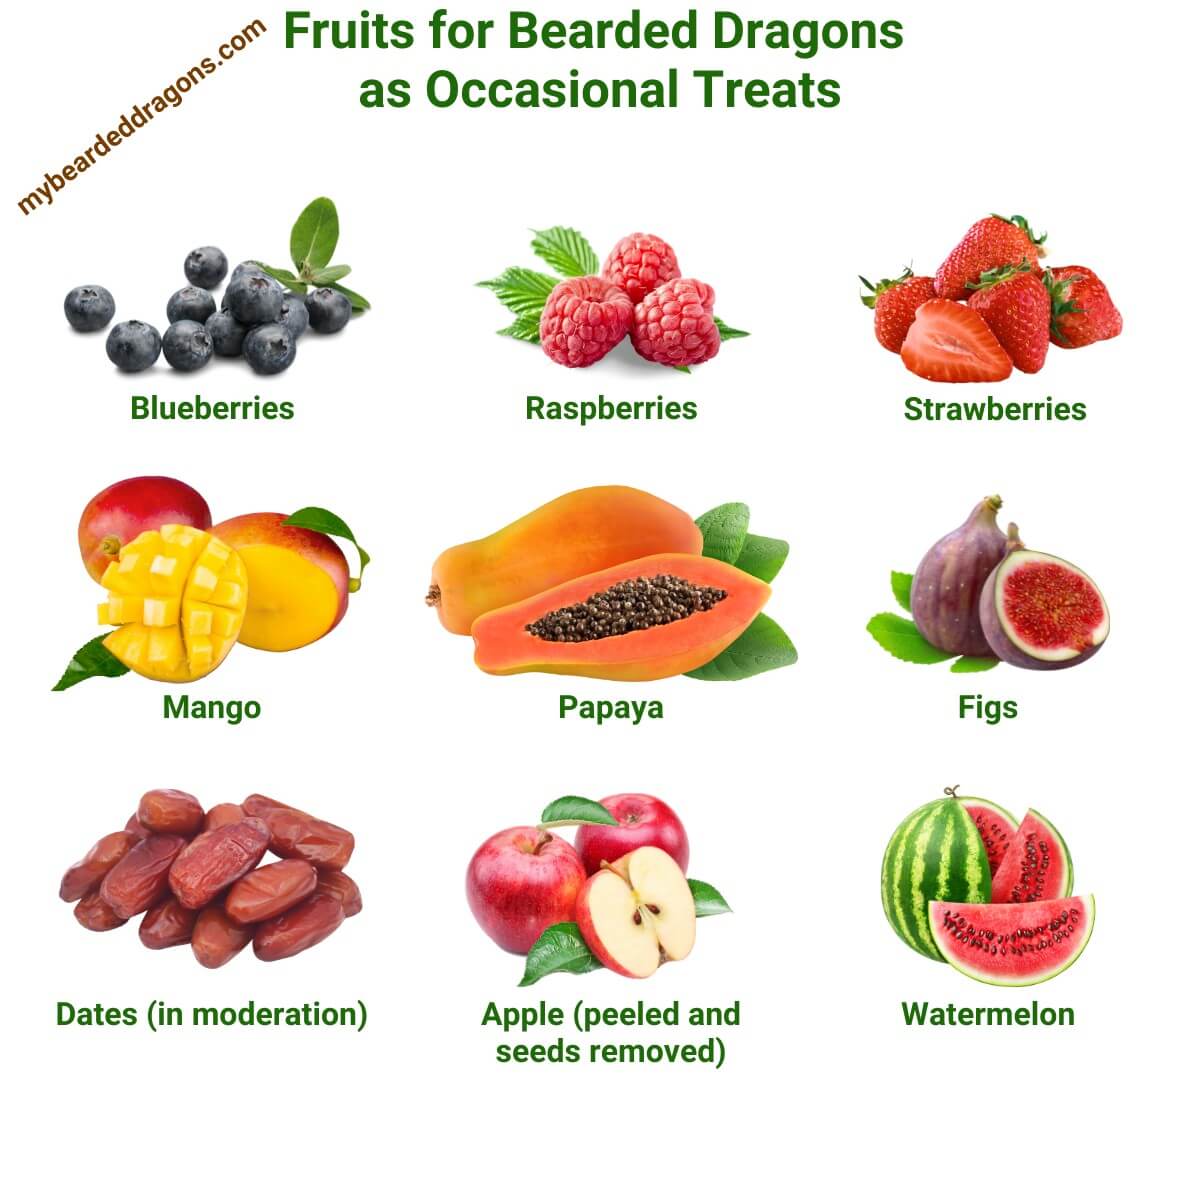 Fruits suitable for bearded dragons to eat